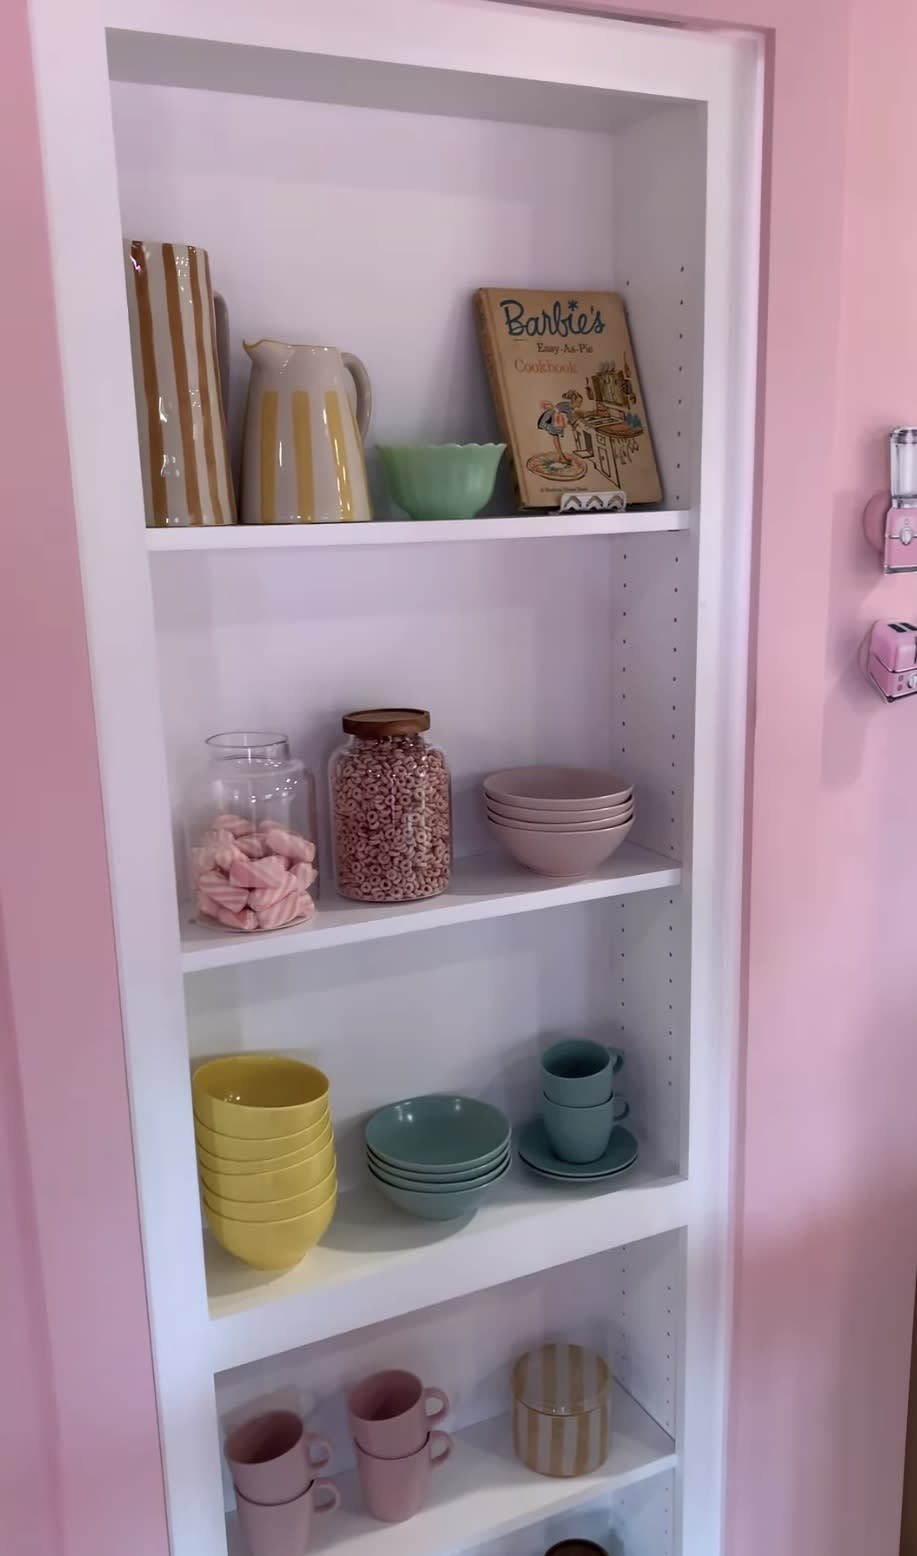 The kitchen inside the home from HGTV's 'Barbie Dreamhouse Challenge'